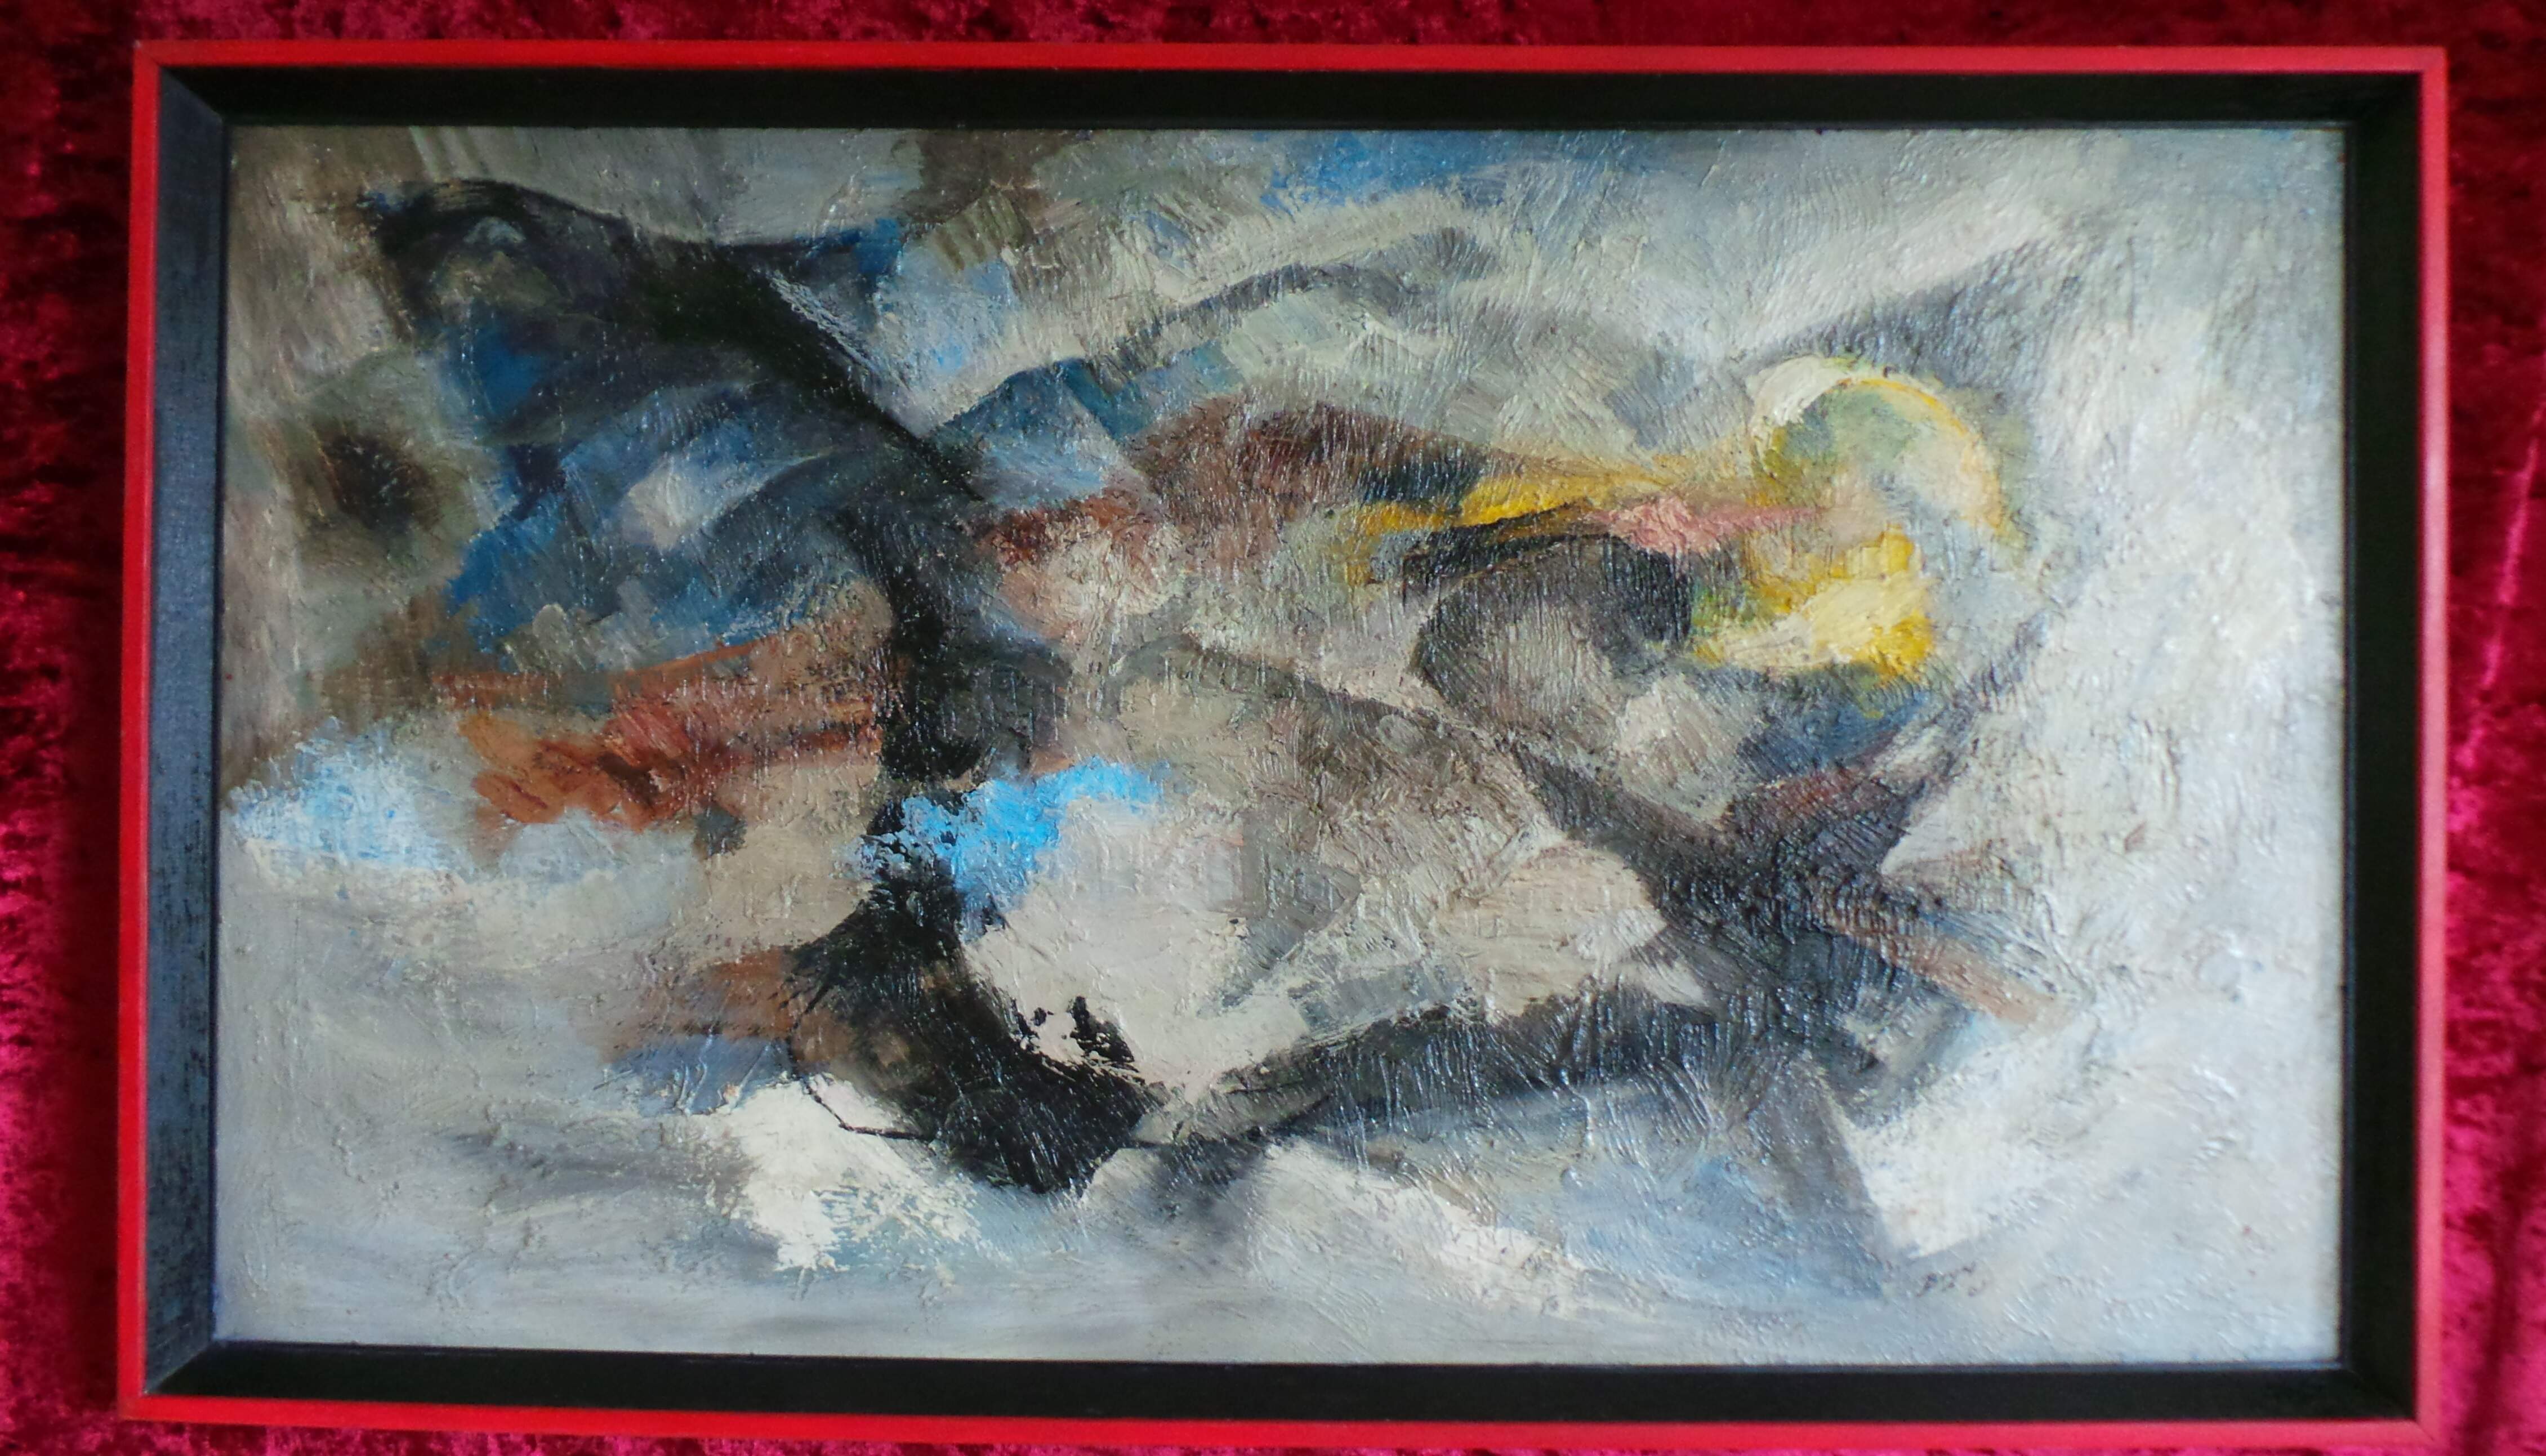 ABSTRACT OIL PAINTING ON A BOARD - MODERN ART 60s XX CENTURY.